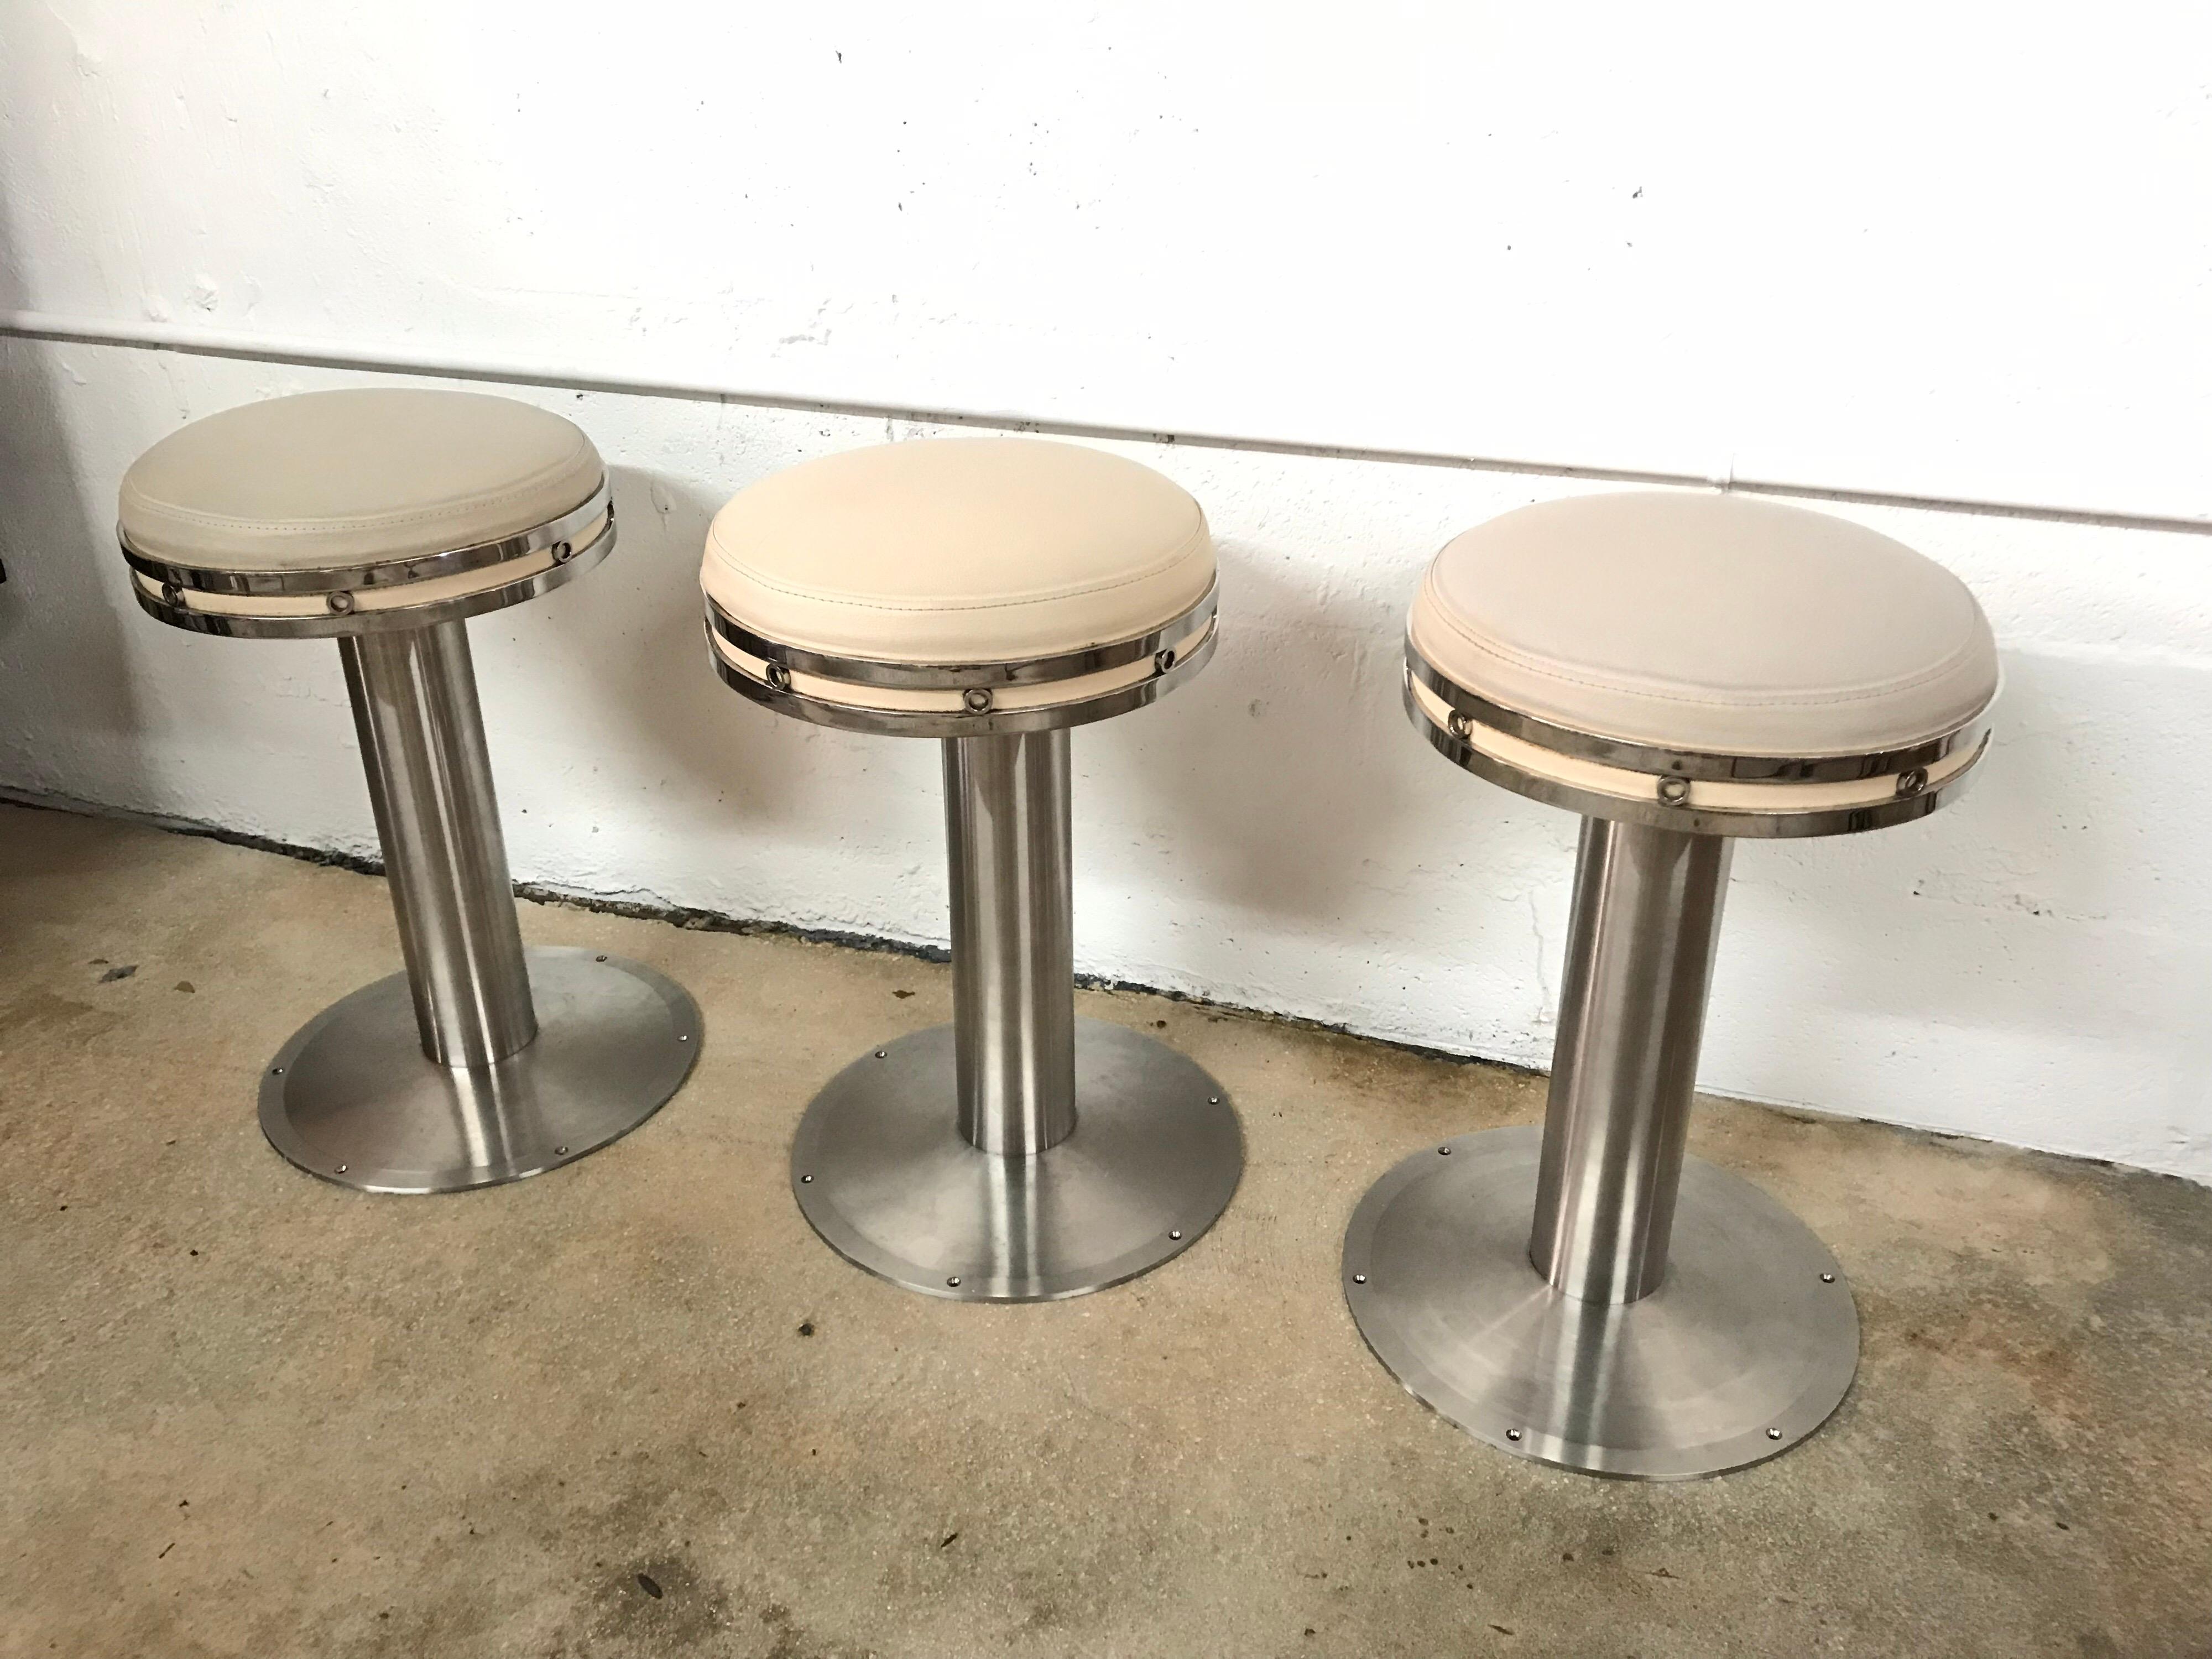 Karl Springer style custom stools, set of three, rendered in steel with leather upholstery, stools have ability to be screwed into floor for yacht or hospitality use.  One stool is swivel the other two are stationary, can make all stools stationary